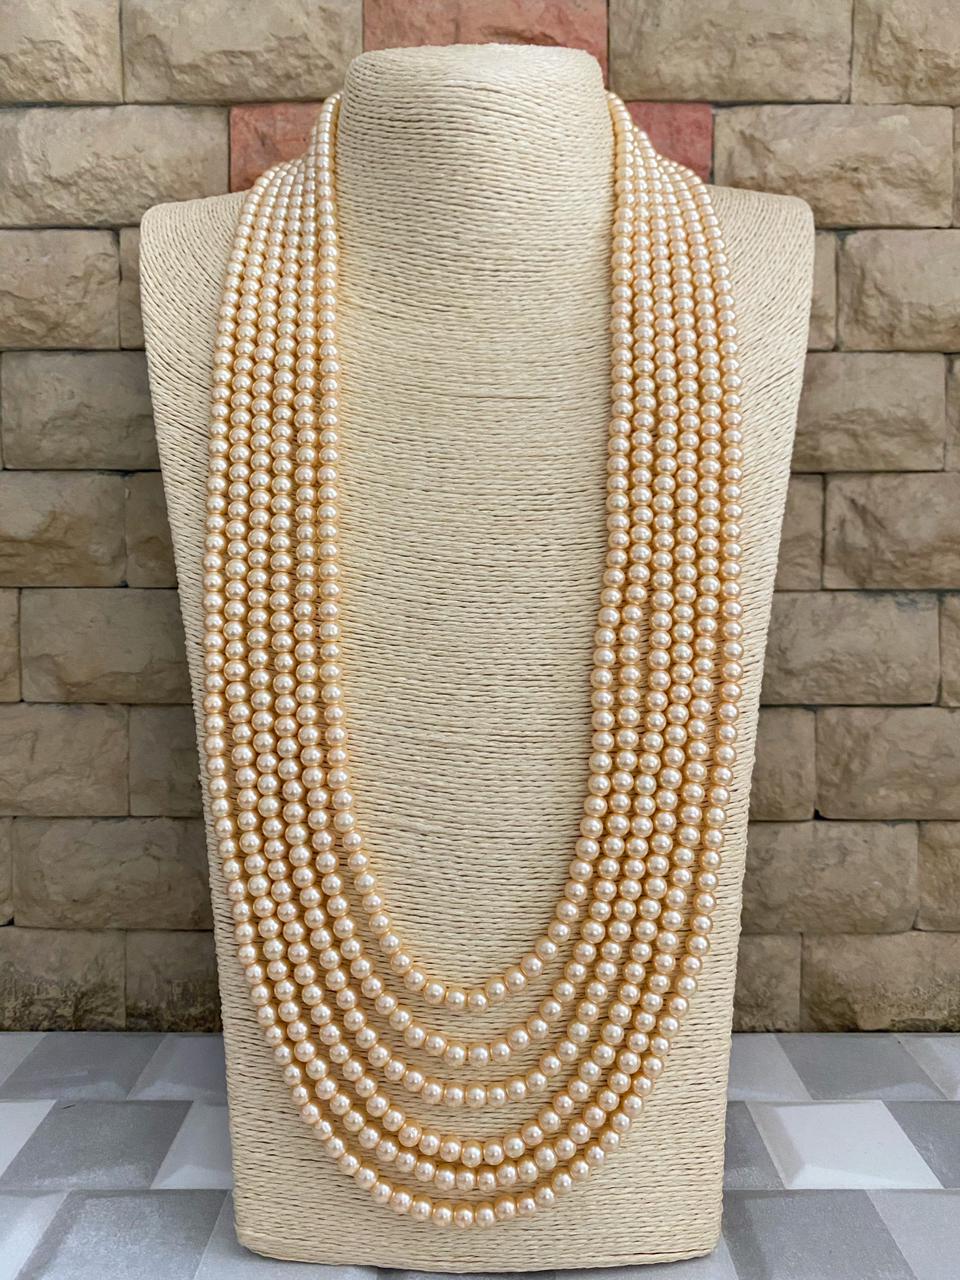 Handcrafted Multi Layered Beaded Pearls Necklace For Men And Woman Beads Jewellery